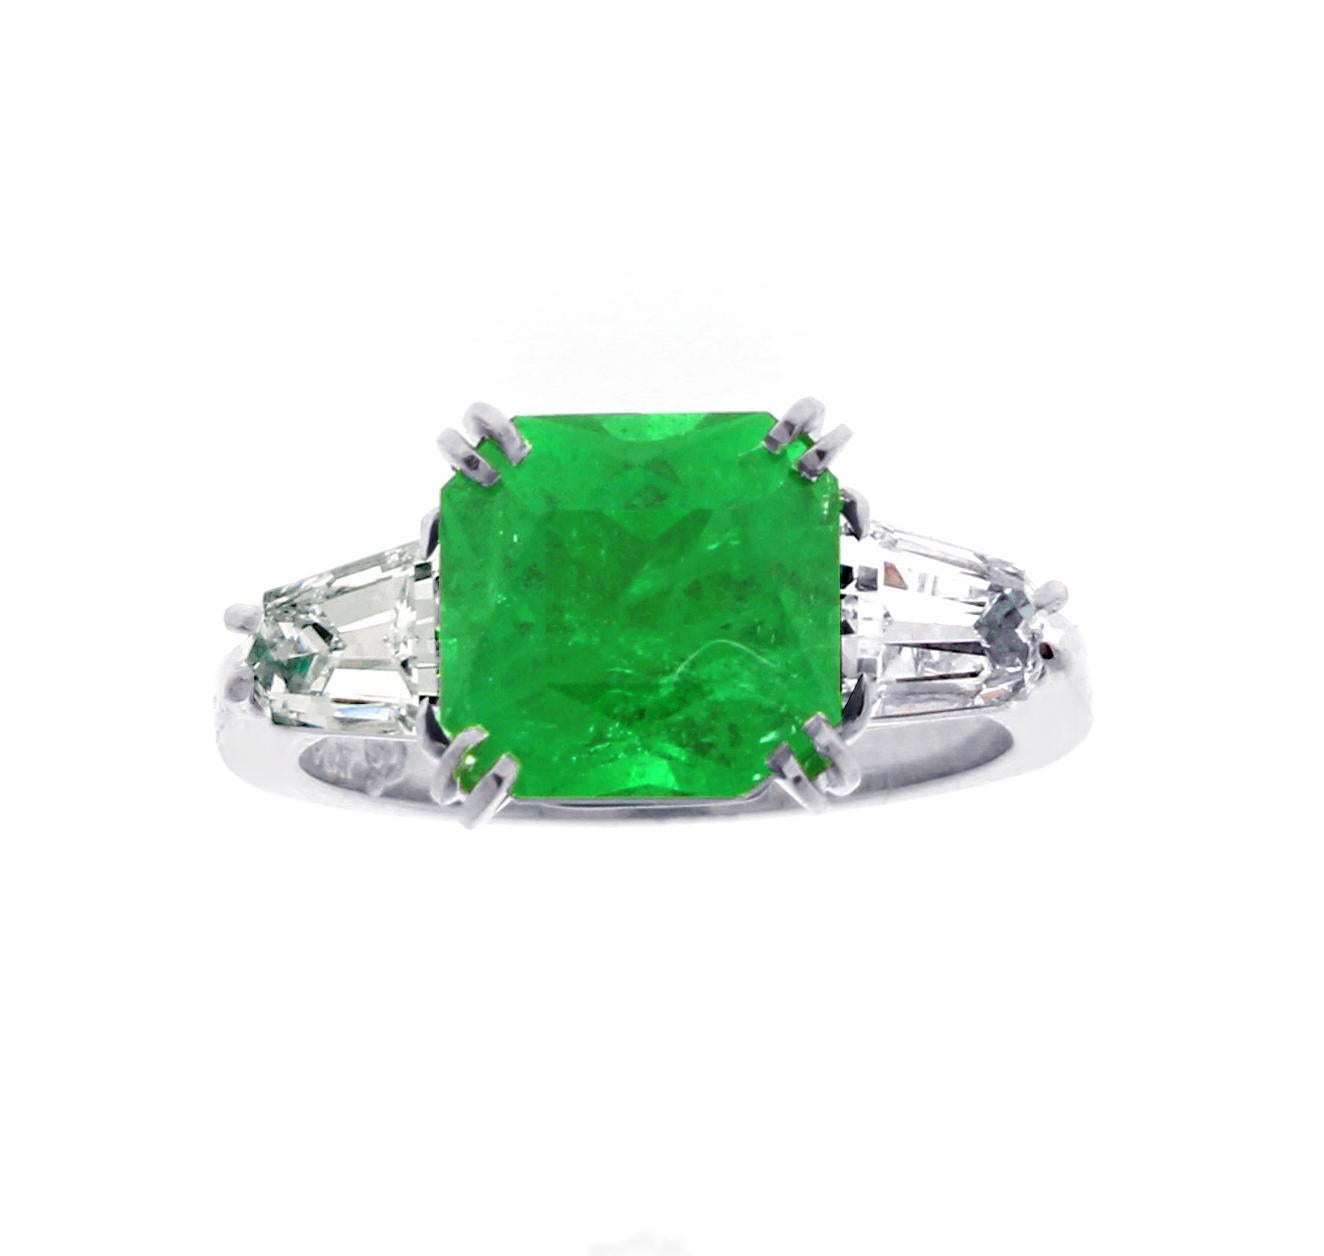 From Pampillonia Jewelers, a gem Zambian square emerald with shield cut diamonds set in a handmade platinum ring.
♦ Designer: Pampillonia
♦ Metal: Platinum
♦ Zambian Gem Emerald =2.84  AGL only minor  traditional clarity enhancement
♦ 2